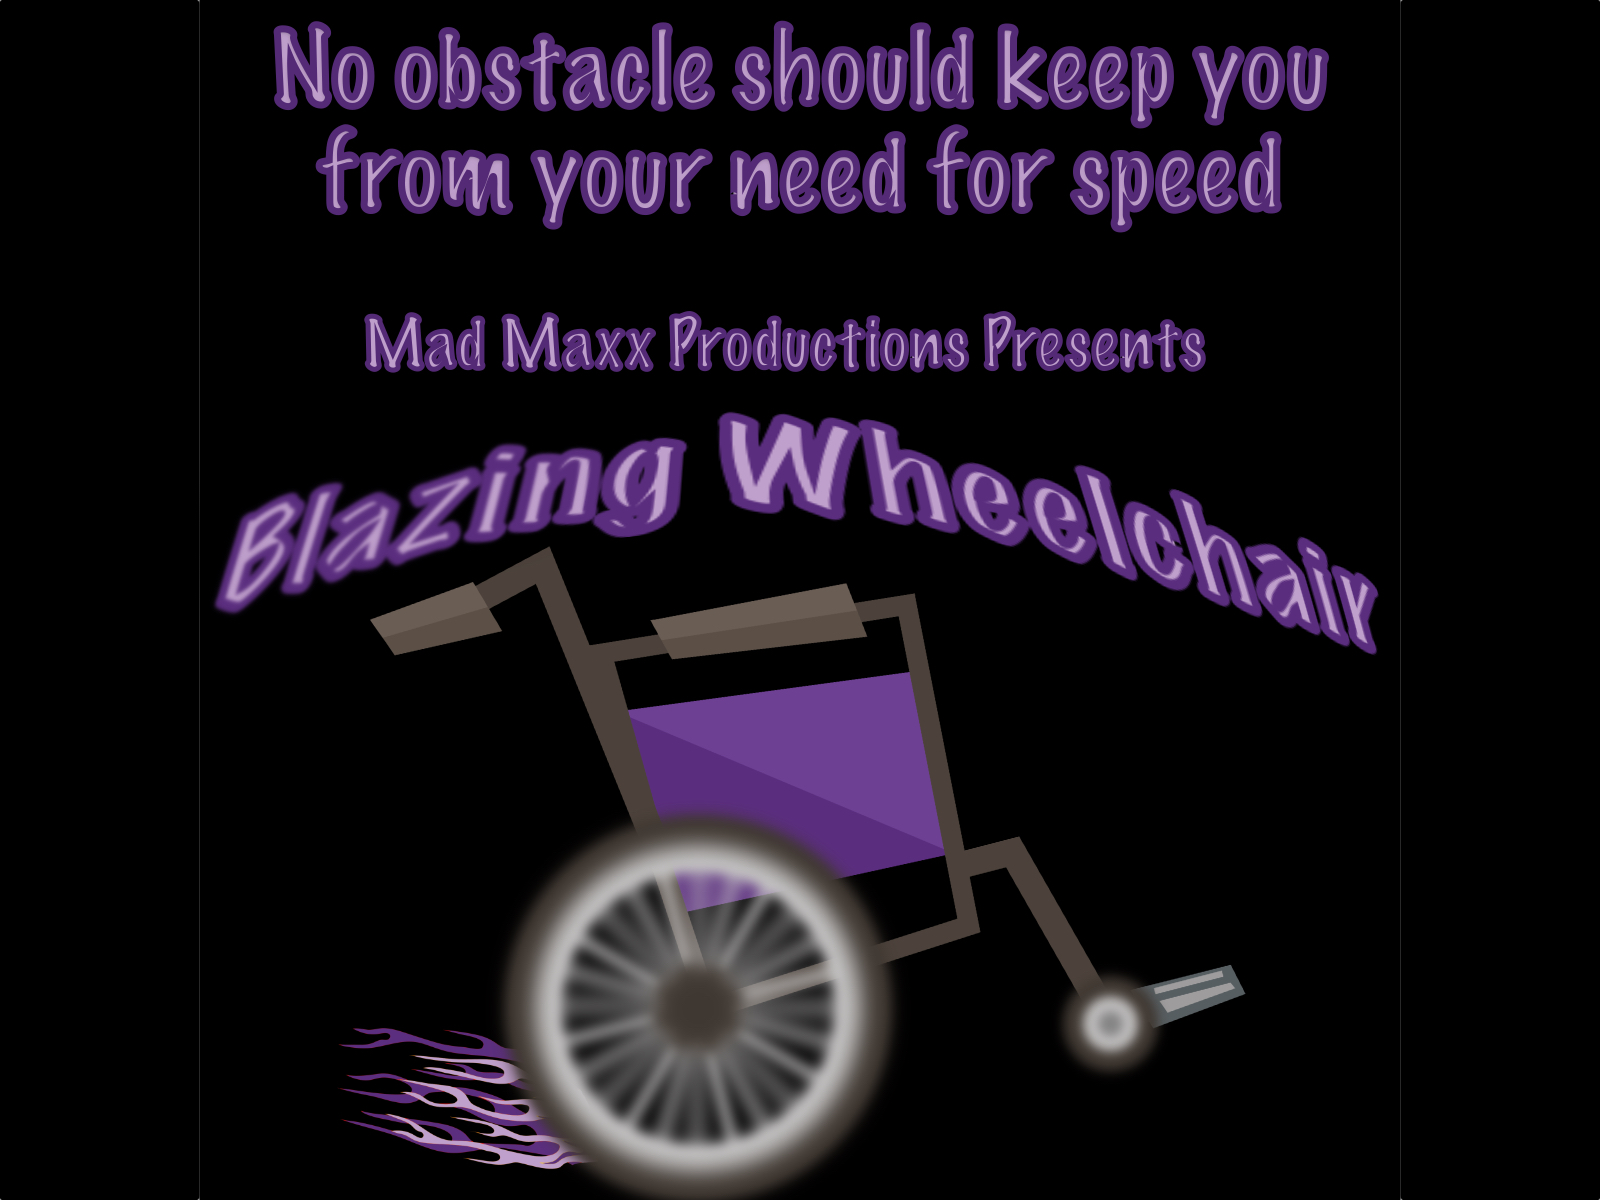 Blazing Wheelchair Available on Amazon Video Direct!